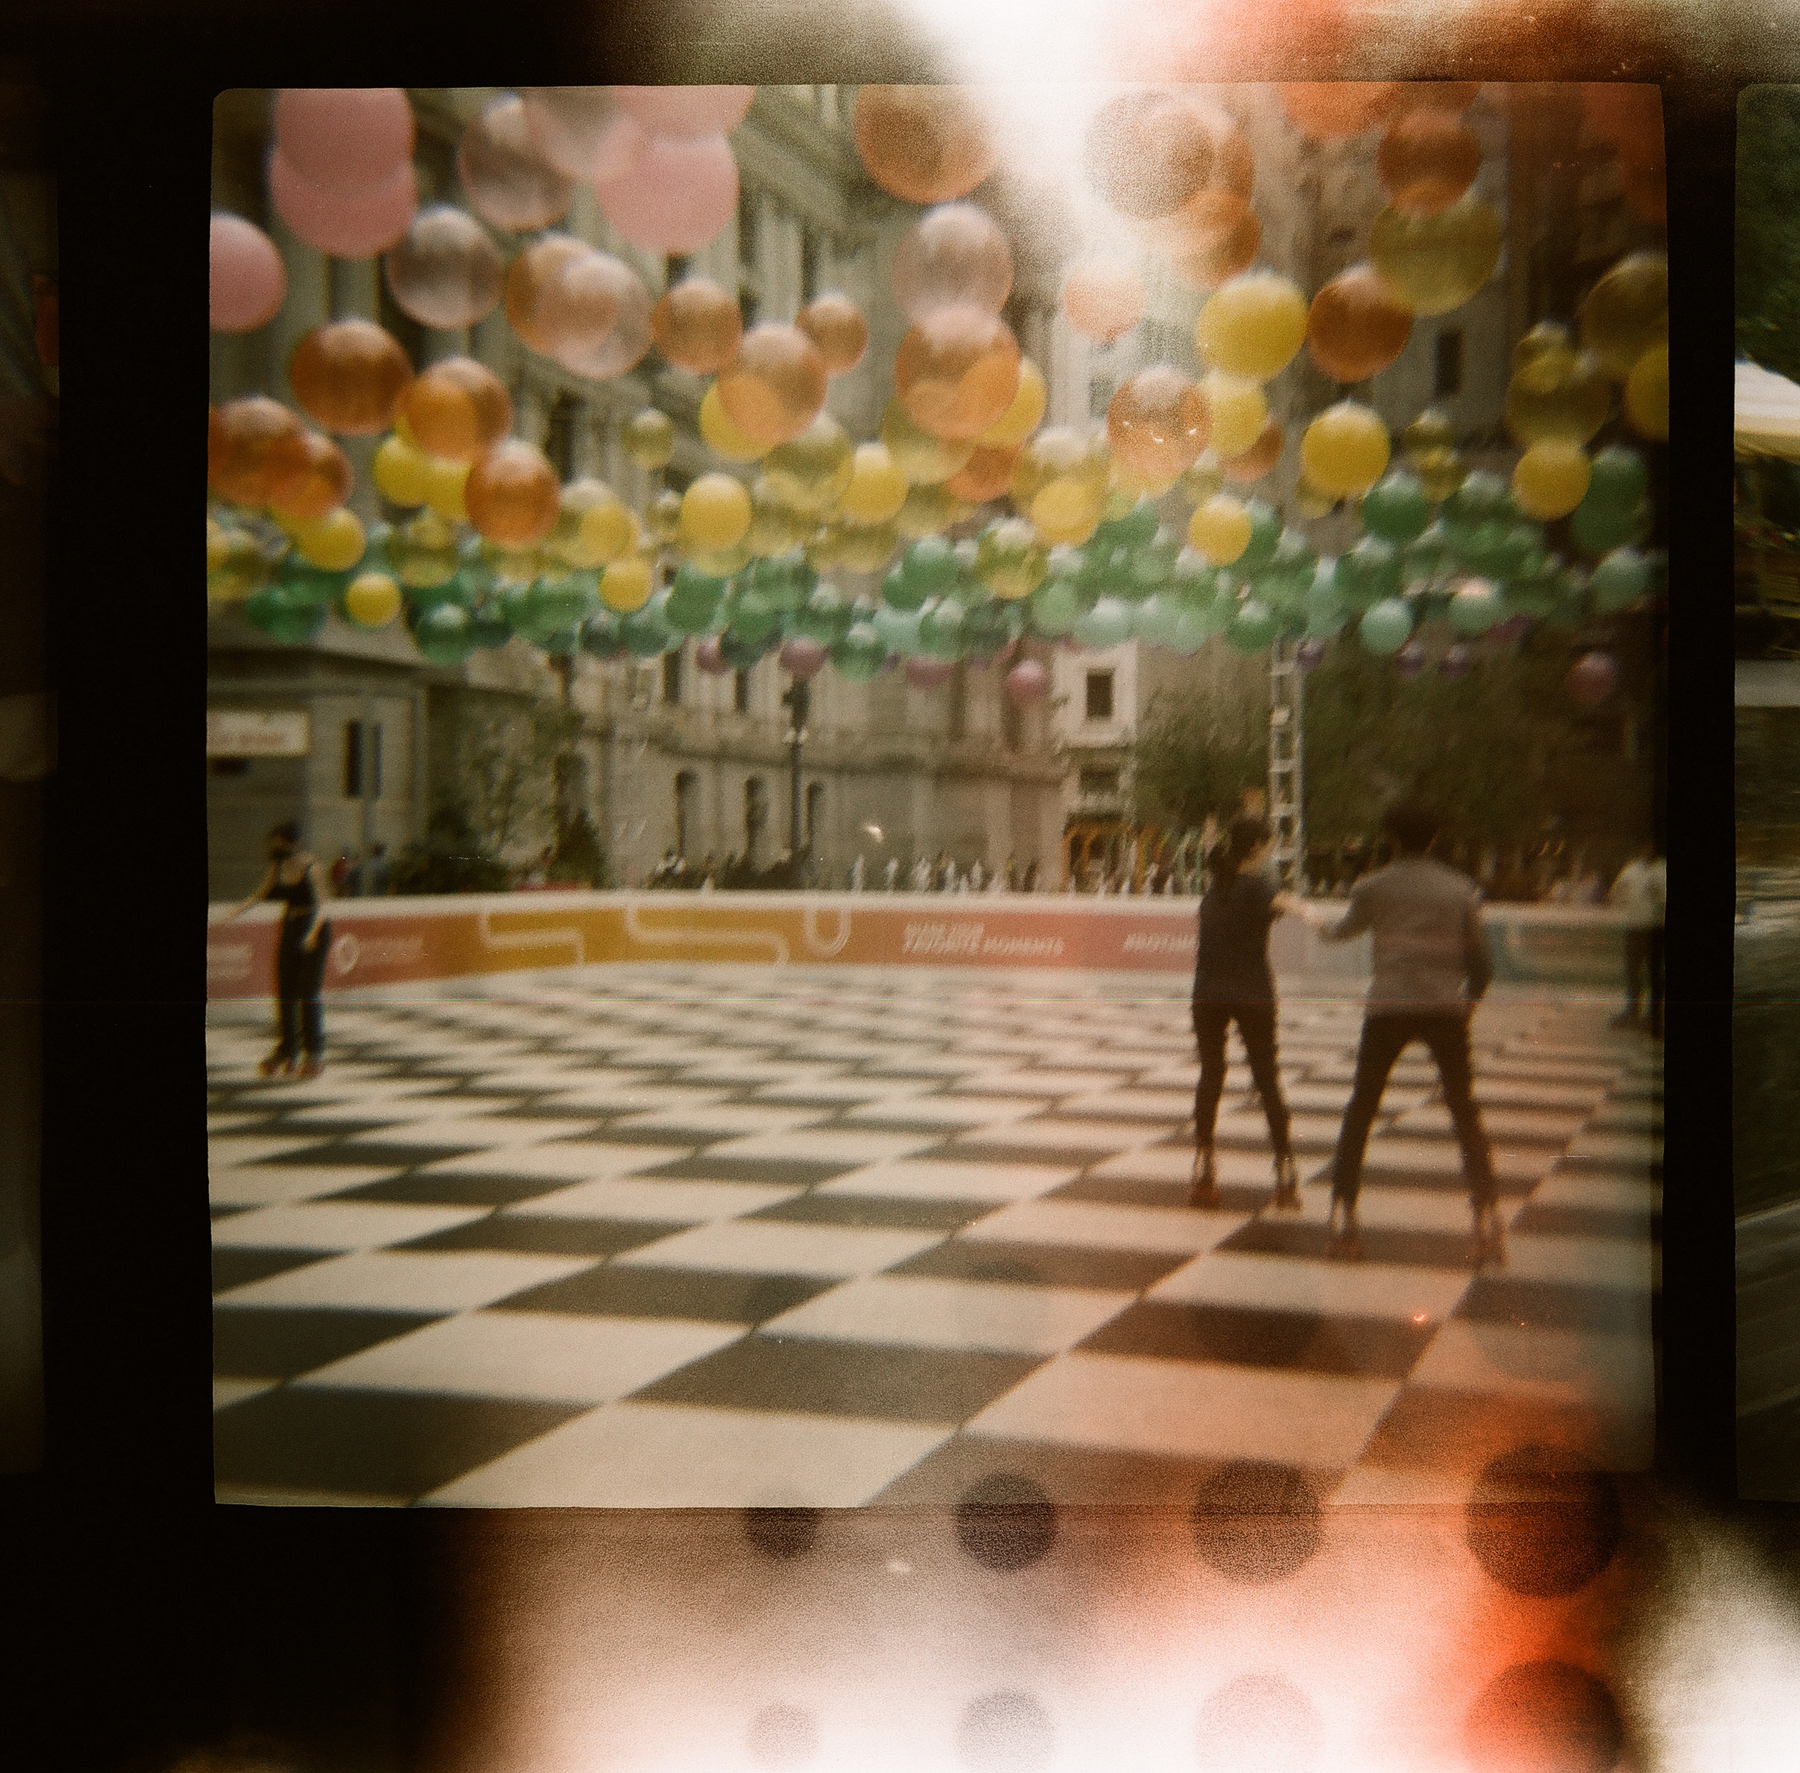 Vintage photograph with light leaks of rollerskaters on a checkerboard rink under a canopy of balloons. Image courtesy of Marina Outwater